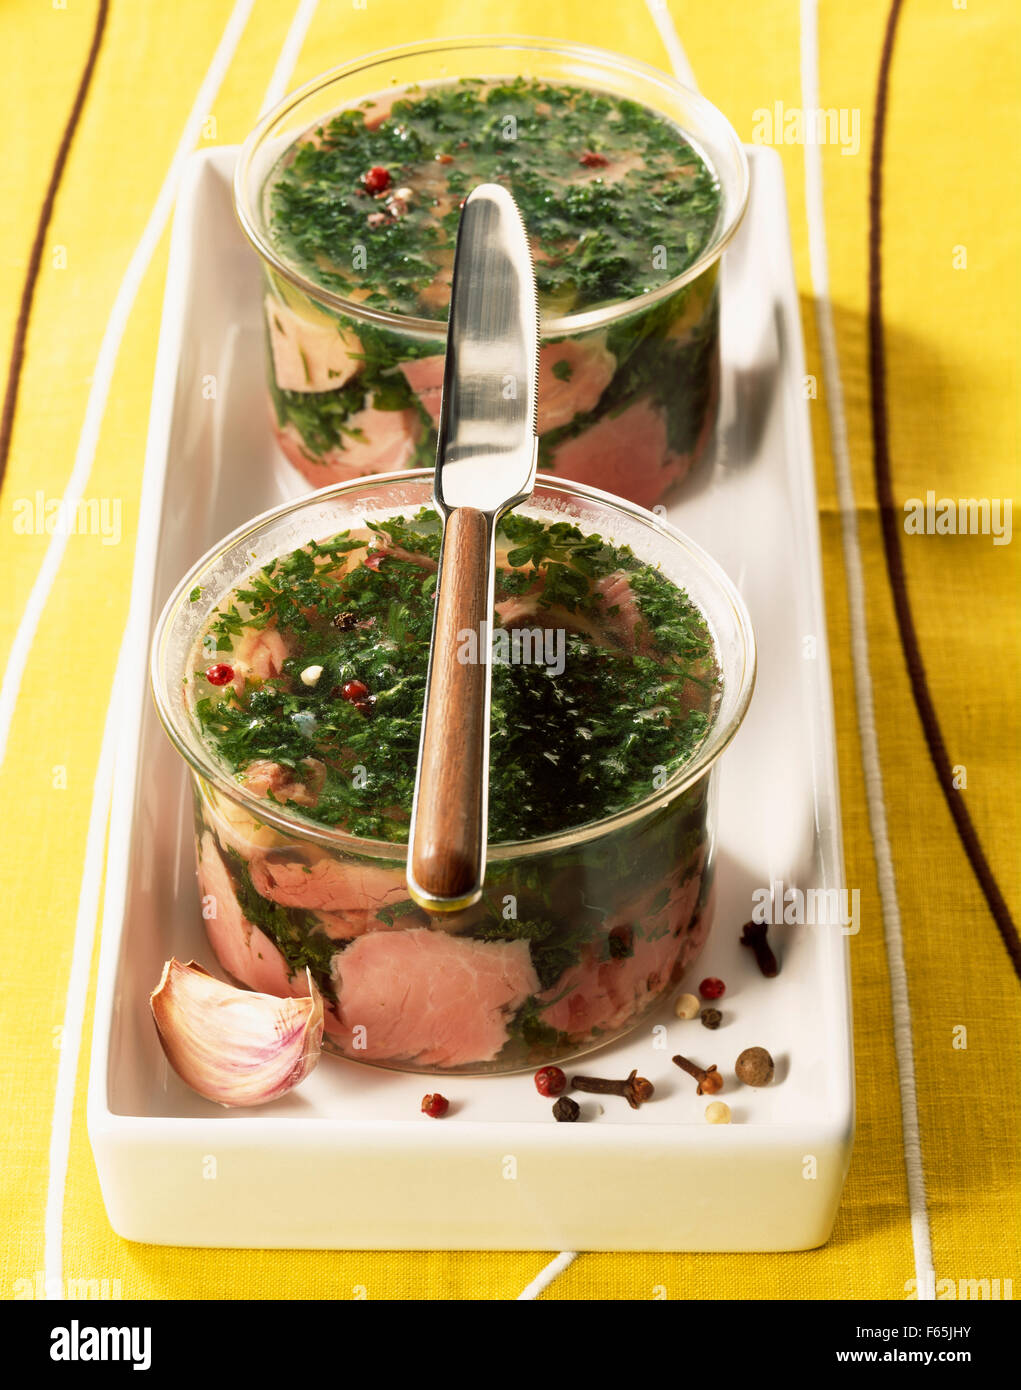 ham marbled with parsley Stock Photo